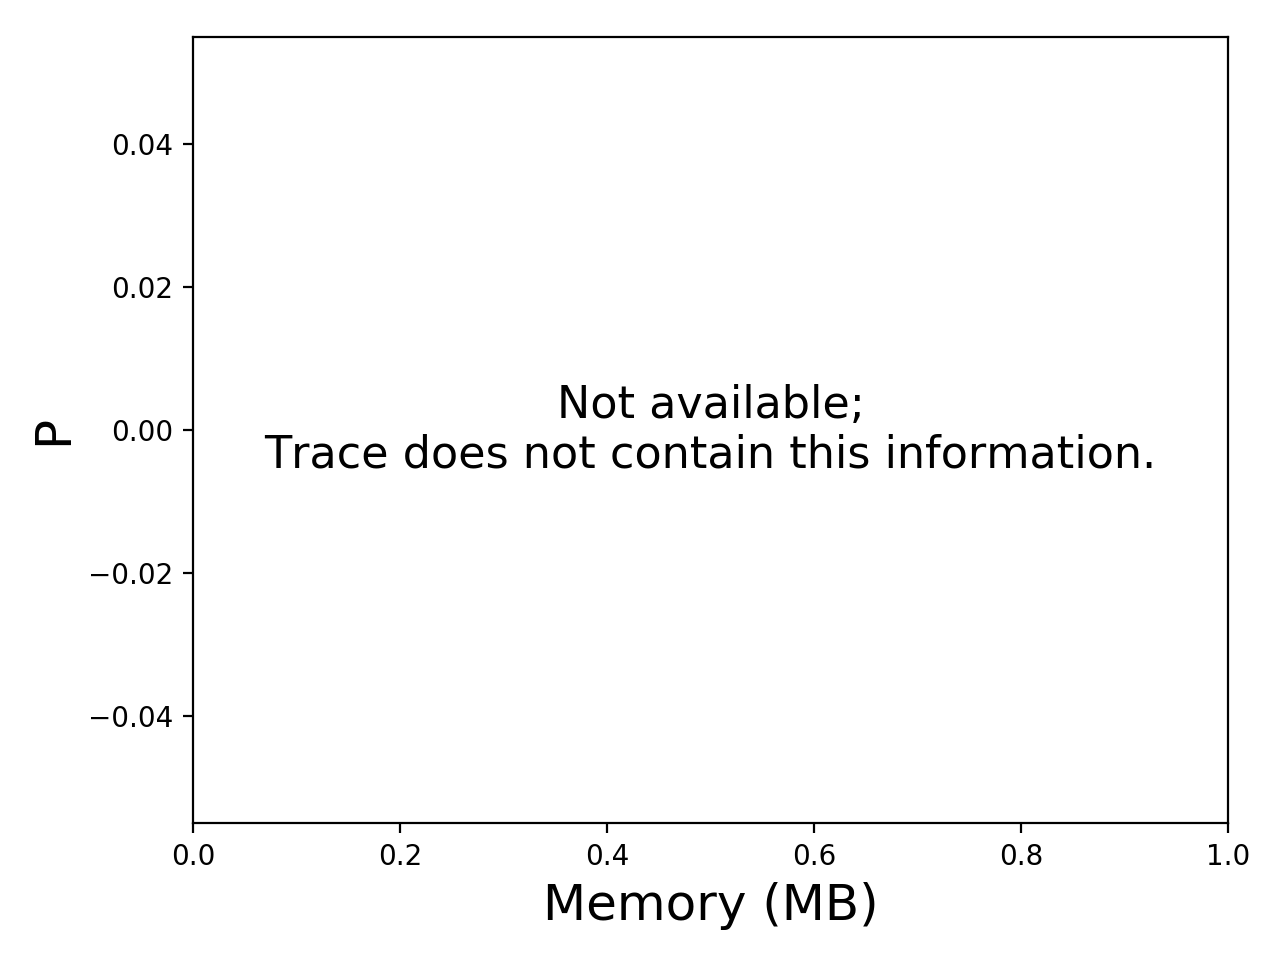 Task memory consumption graph for the workflowhub_montage_ti01-971107n_degree-4-0_osg_schema-0-2_montage-4-0-osg-run009 trace.